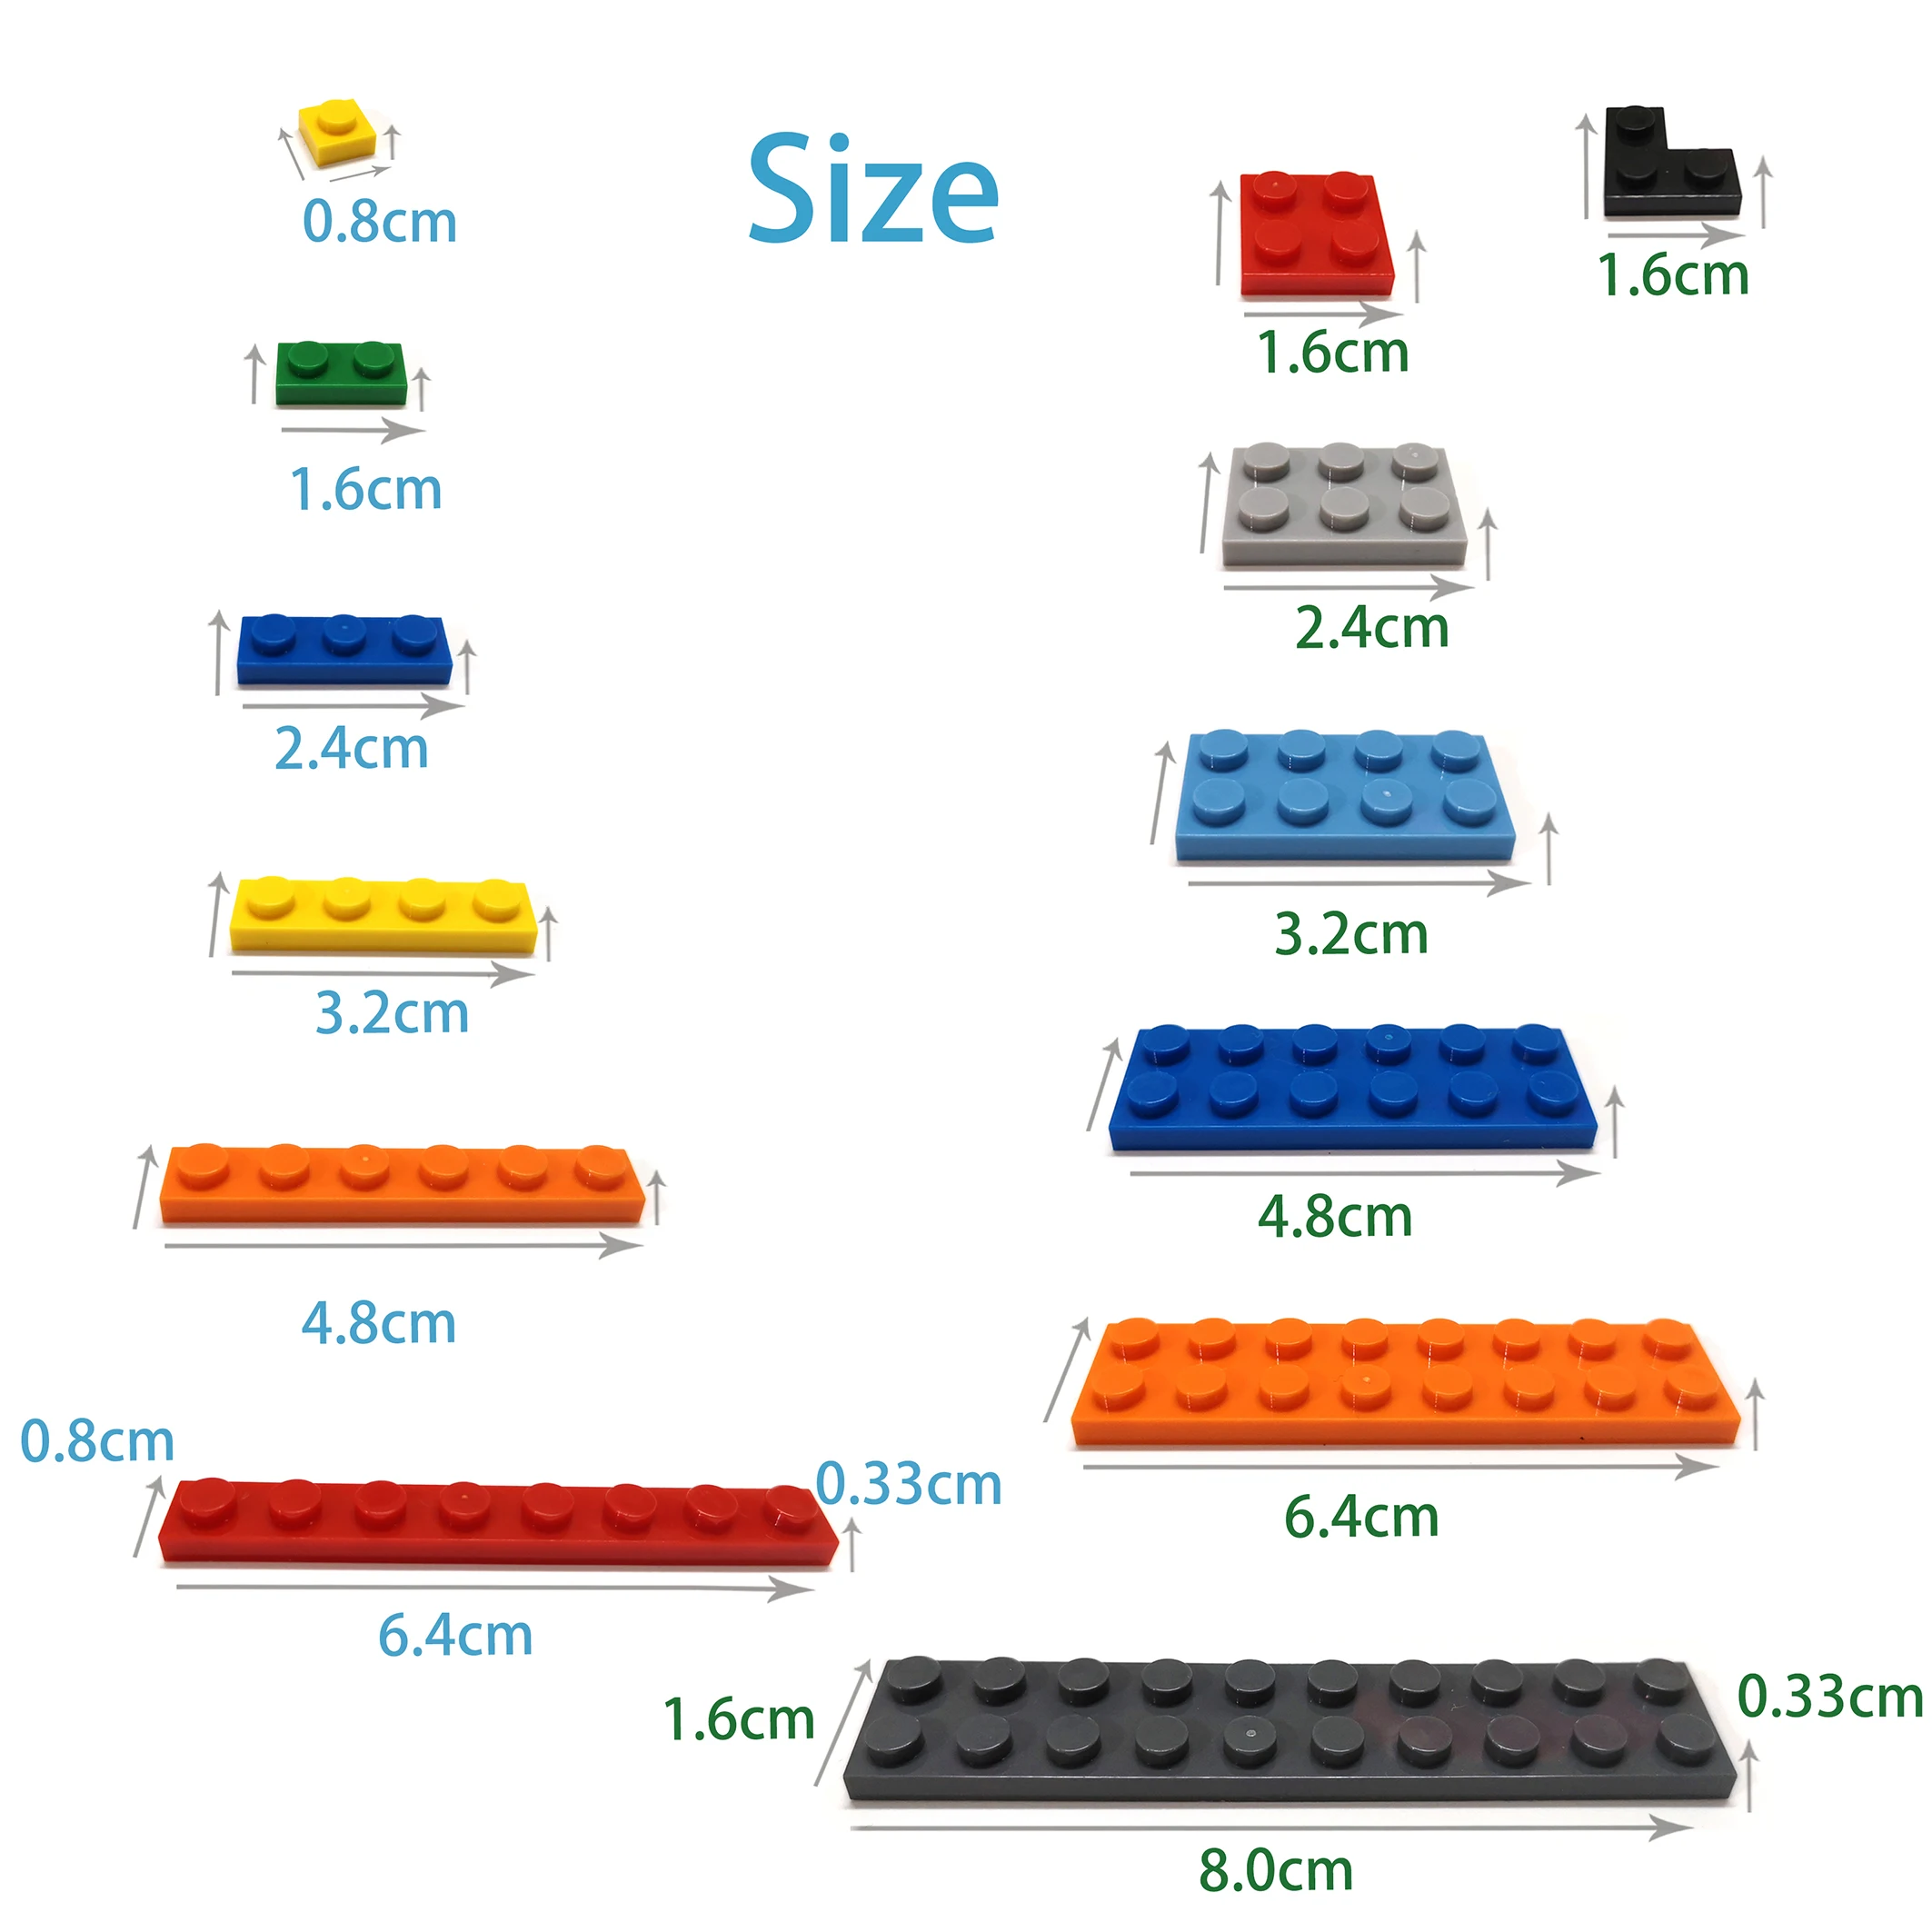 100pcs DIY Building Blocks Figure Bricks Smooth 1x1 24Color Educational Creative Size Toys for Children Compatible With Brands